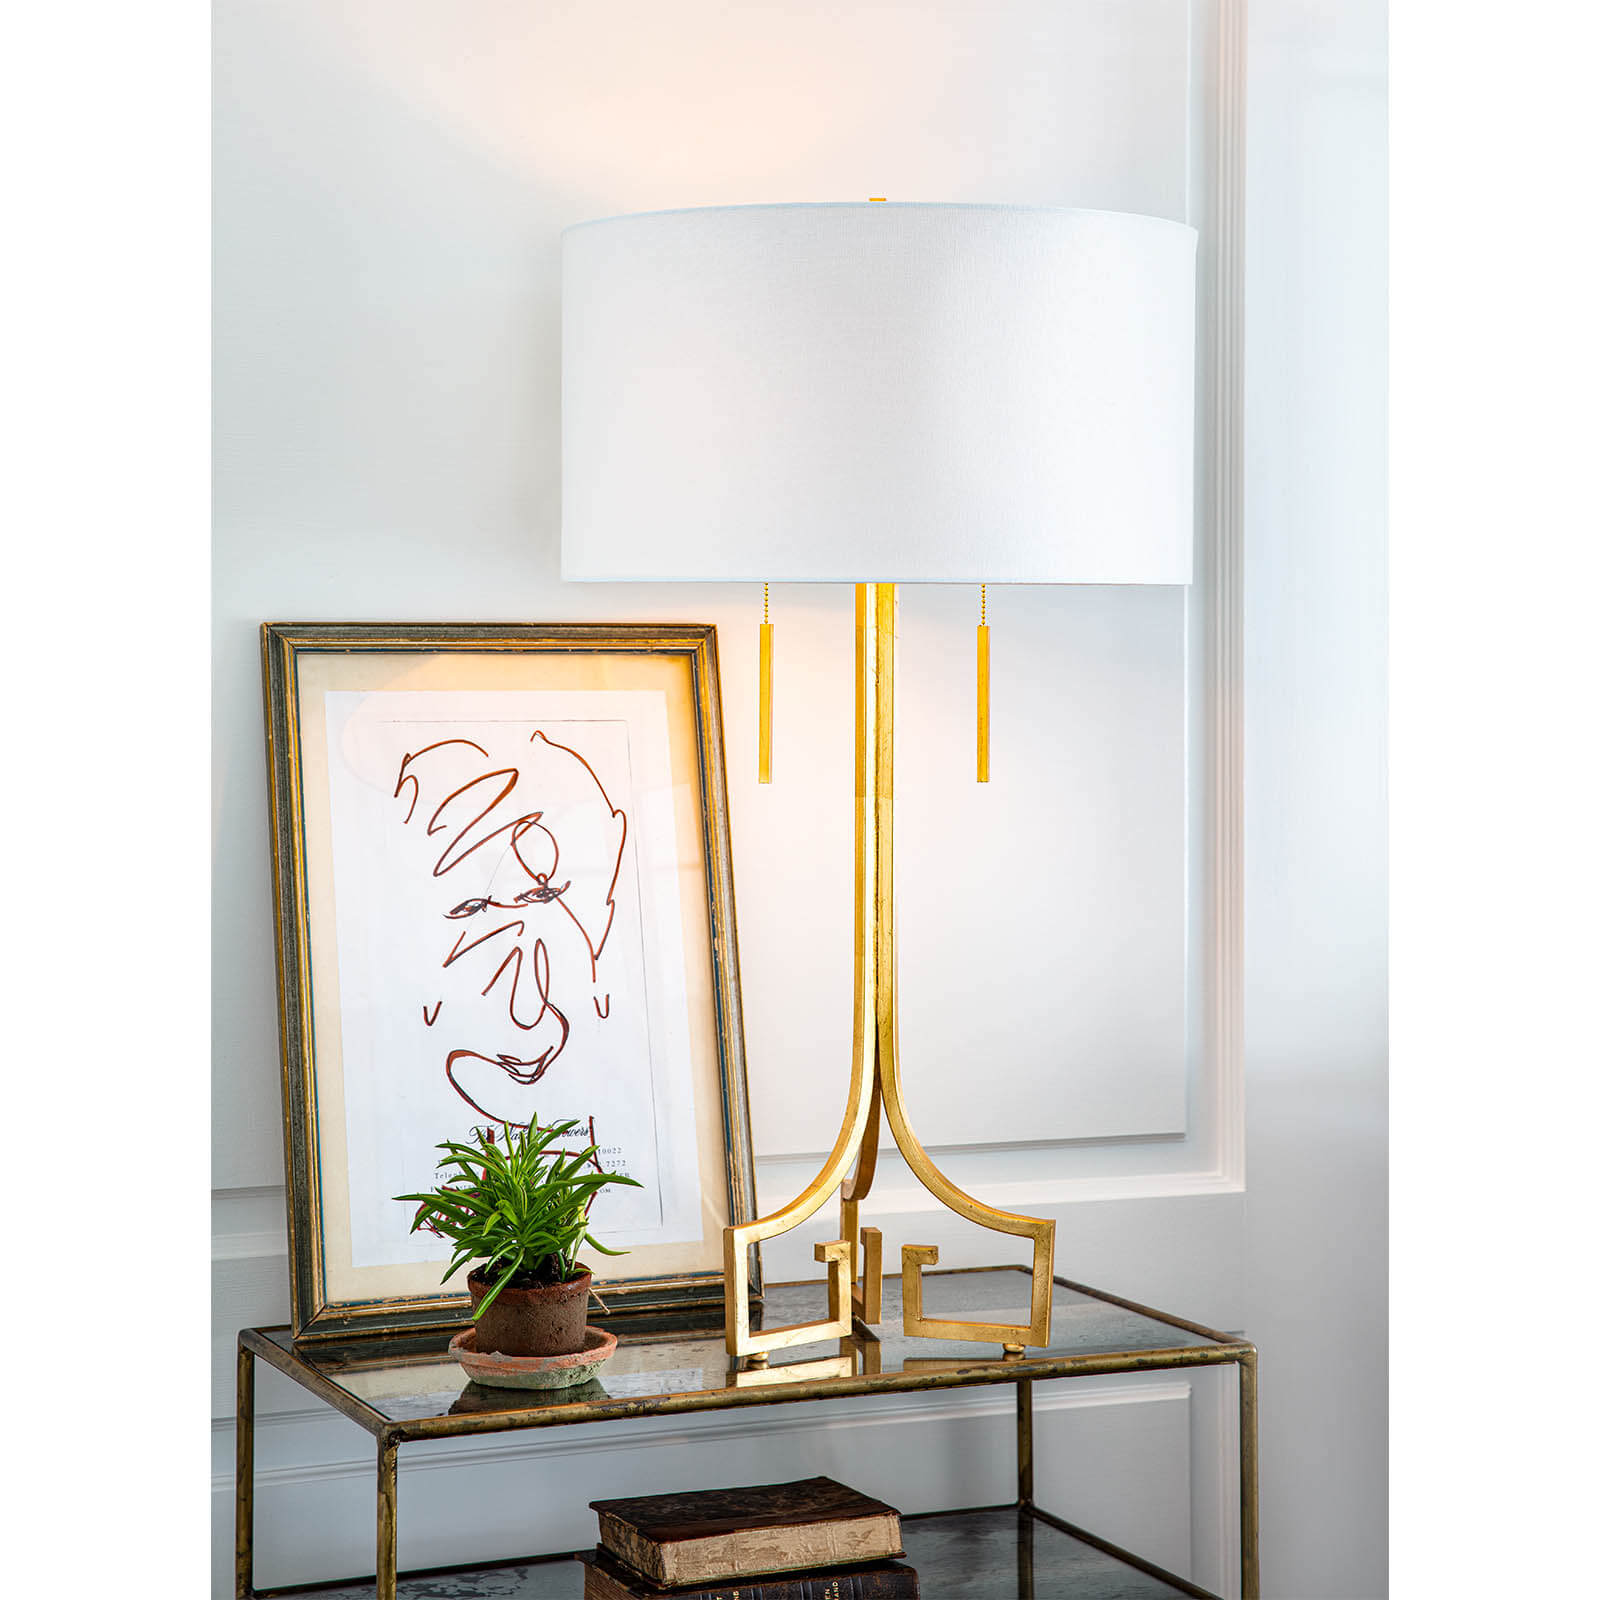 Le Chic Table Lamp in Antique Gold Leaf by Regina Andrew